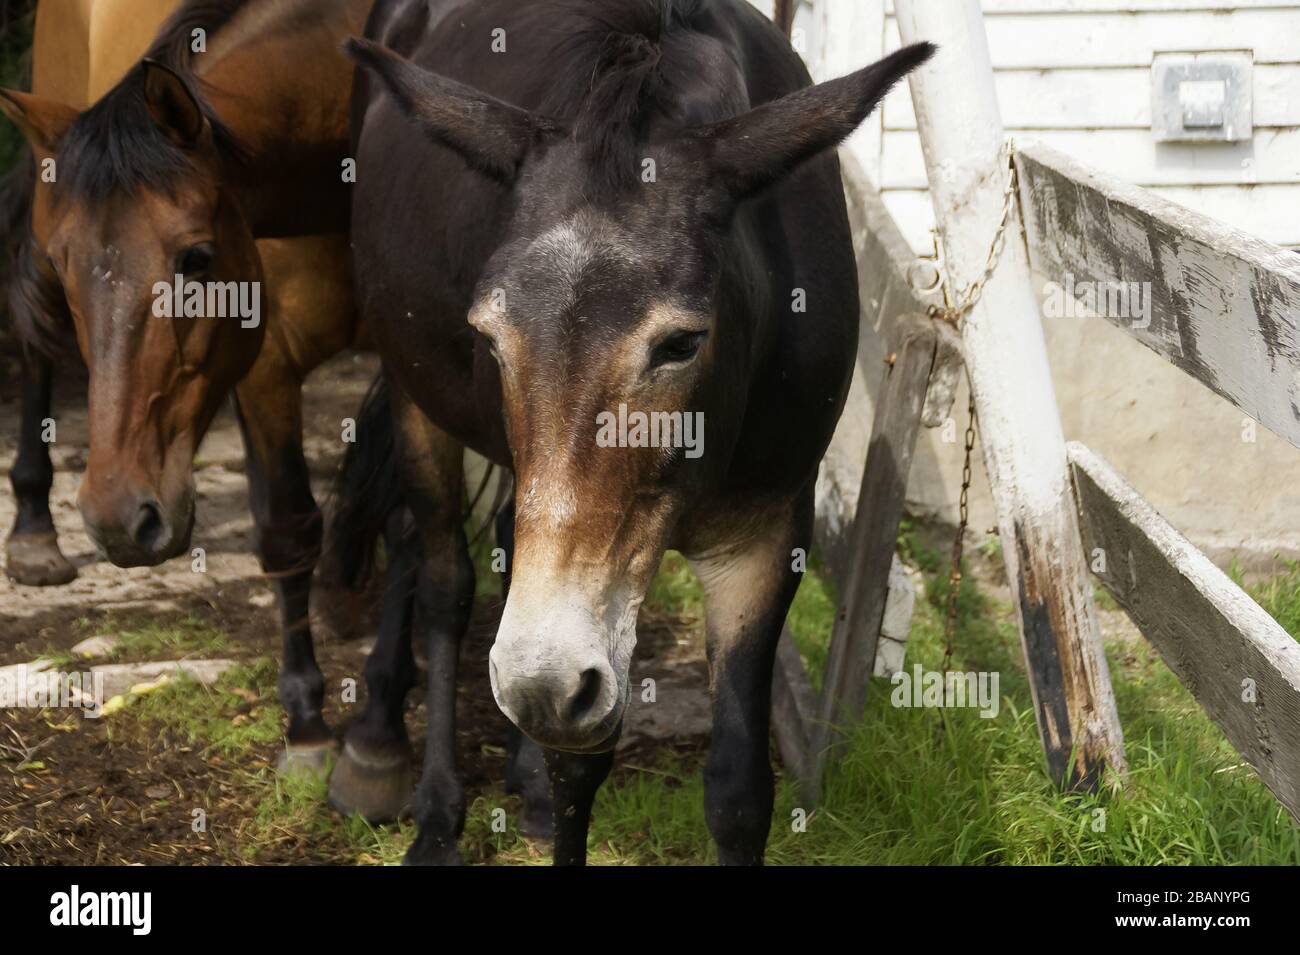 Close-up of a black mule followed by a brown horse next to a weathered white fence with green grass Stock Photo